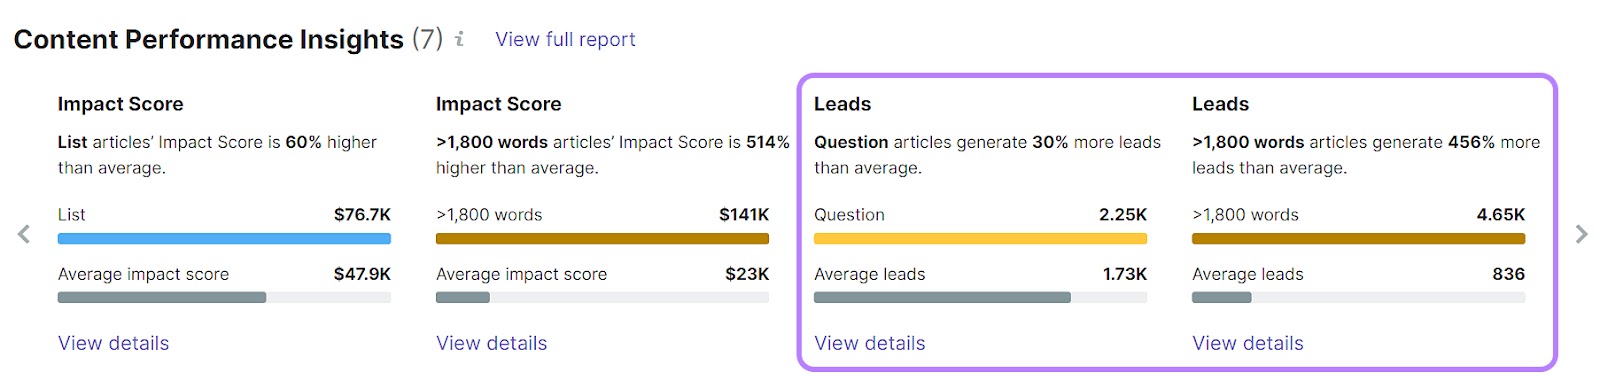 "Content Performance Insights" section of ImpactHero's dashboard